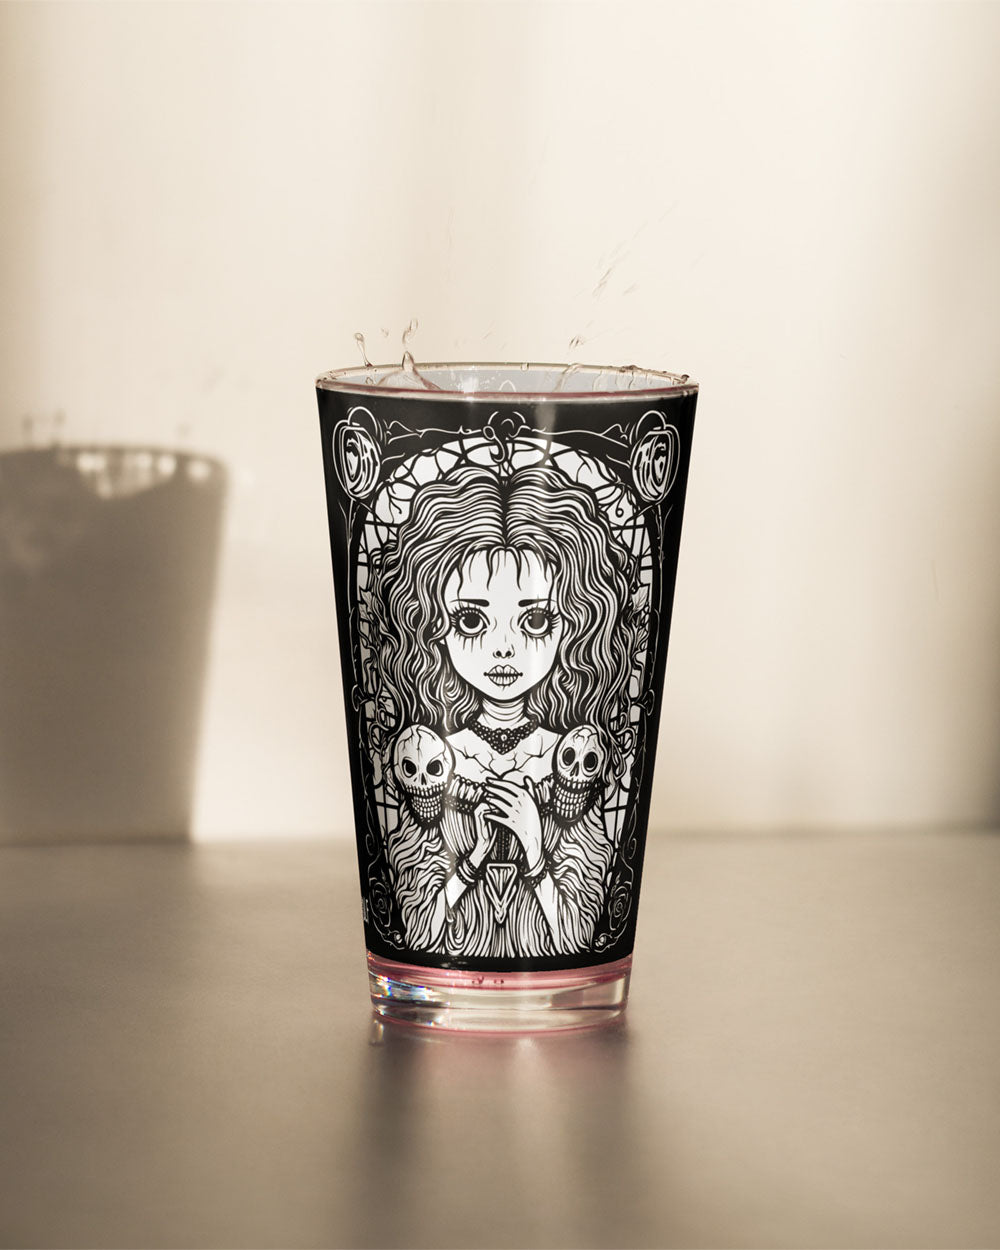 16oz Glass Cup/ Anime Inspired Glass Cup/ SG / Glass Cup with Lid/ Anime Cup